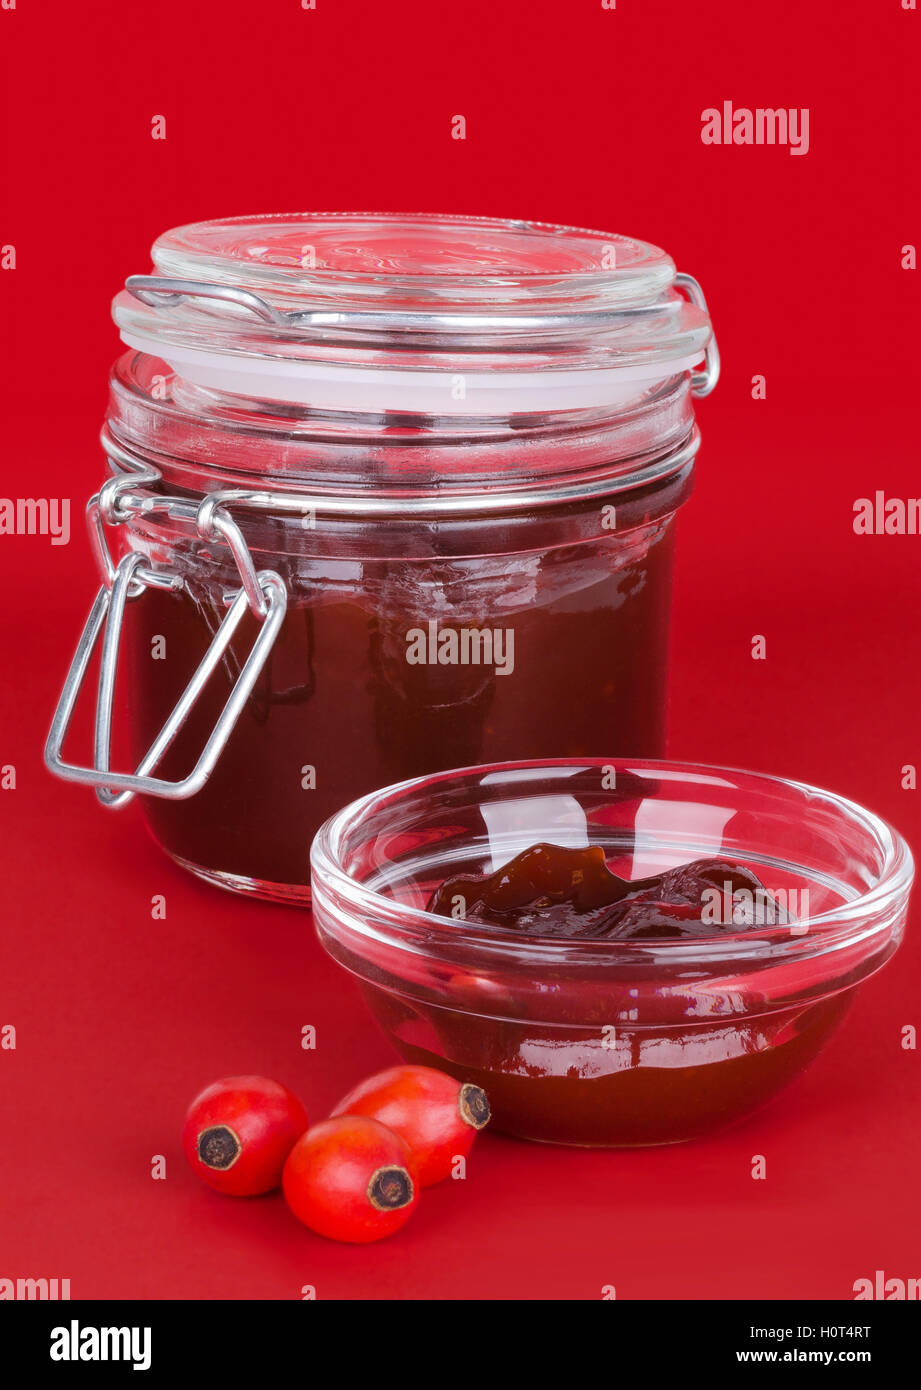 Rose hip jam and fruits over red background, also rose haw or rose hep. Marmelade in glass jar and bowl. Stock Photo